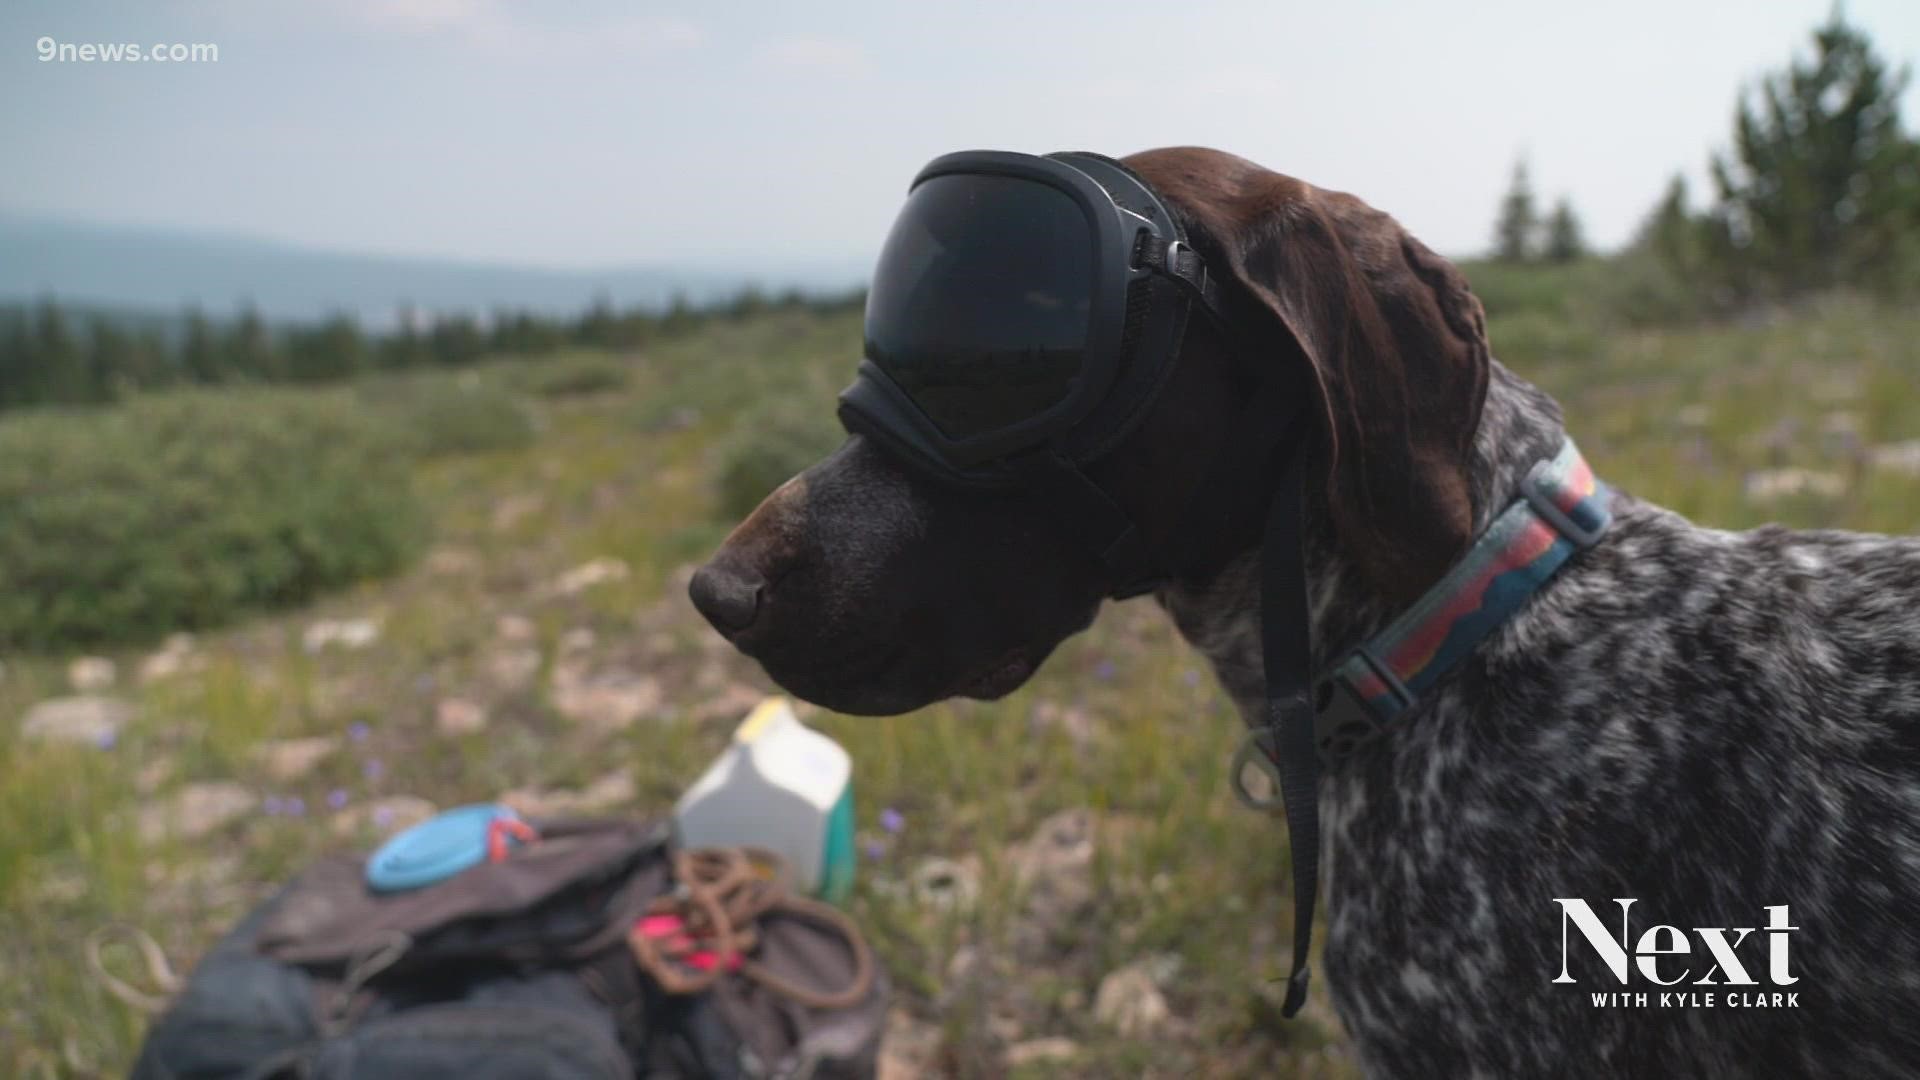 Researcher Jacqueline Staab says her dog, Darwin, is America's only conservation detection dog trained to sniff out bumblebee nests. He's been working in Colorado.